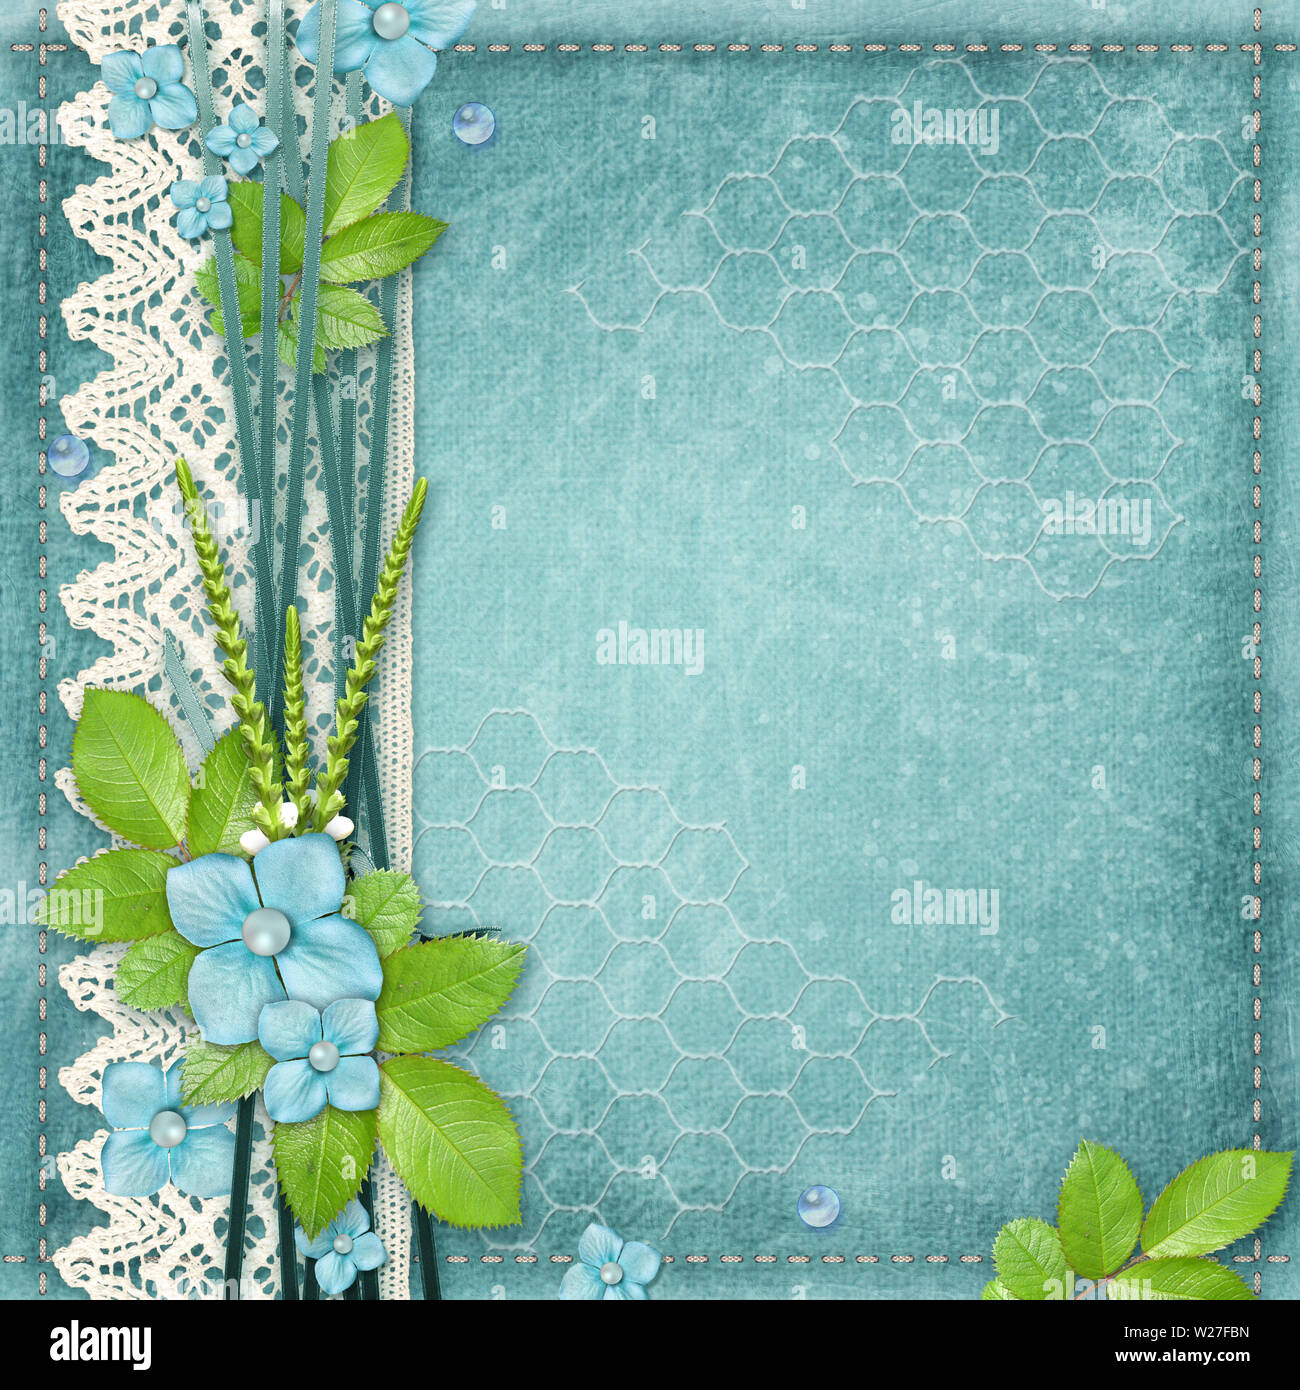 Blue vintage background for album cover or page Stock Photo - Alamy